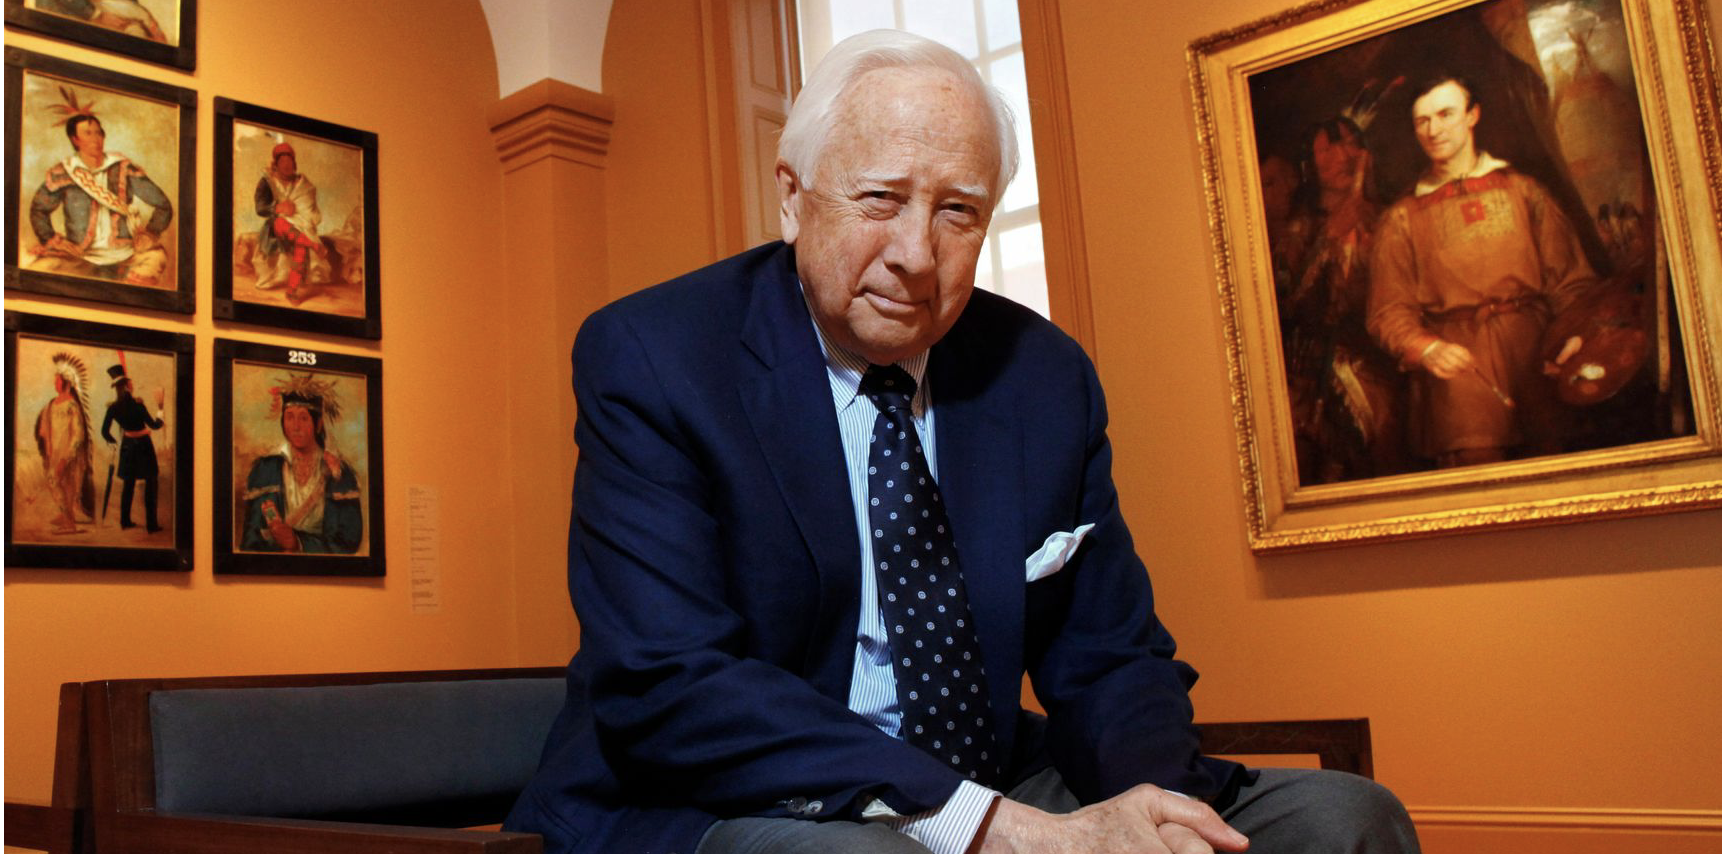 David McCullough at the National Portrait Gallery